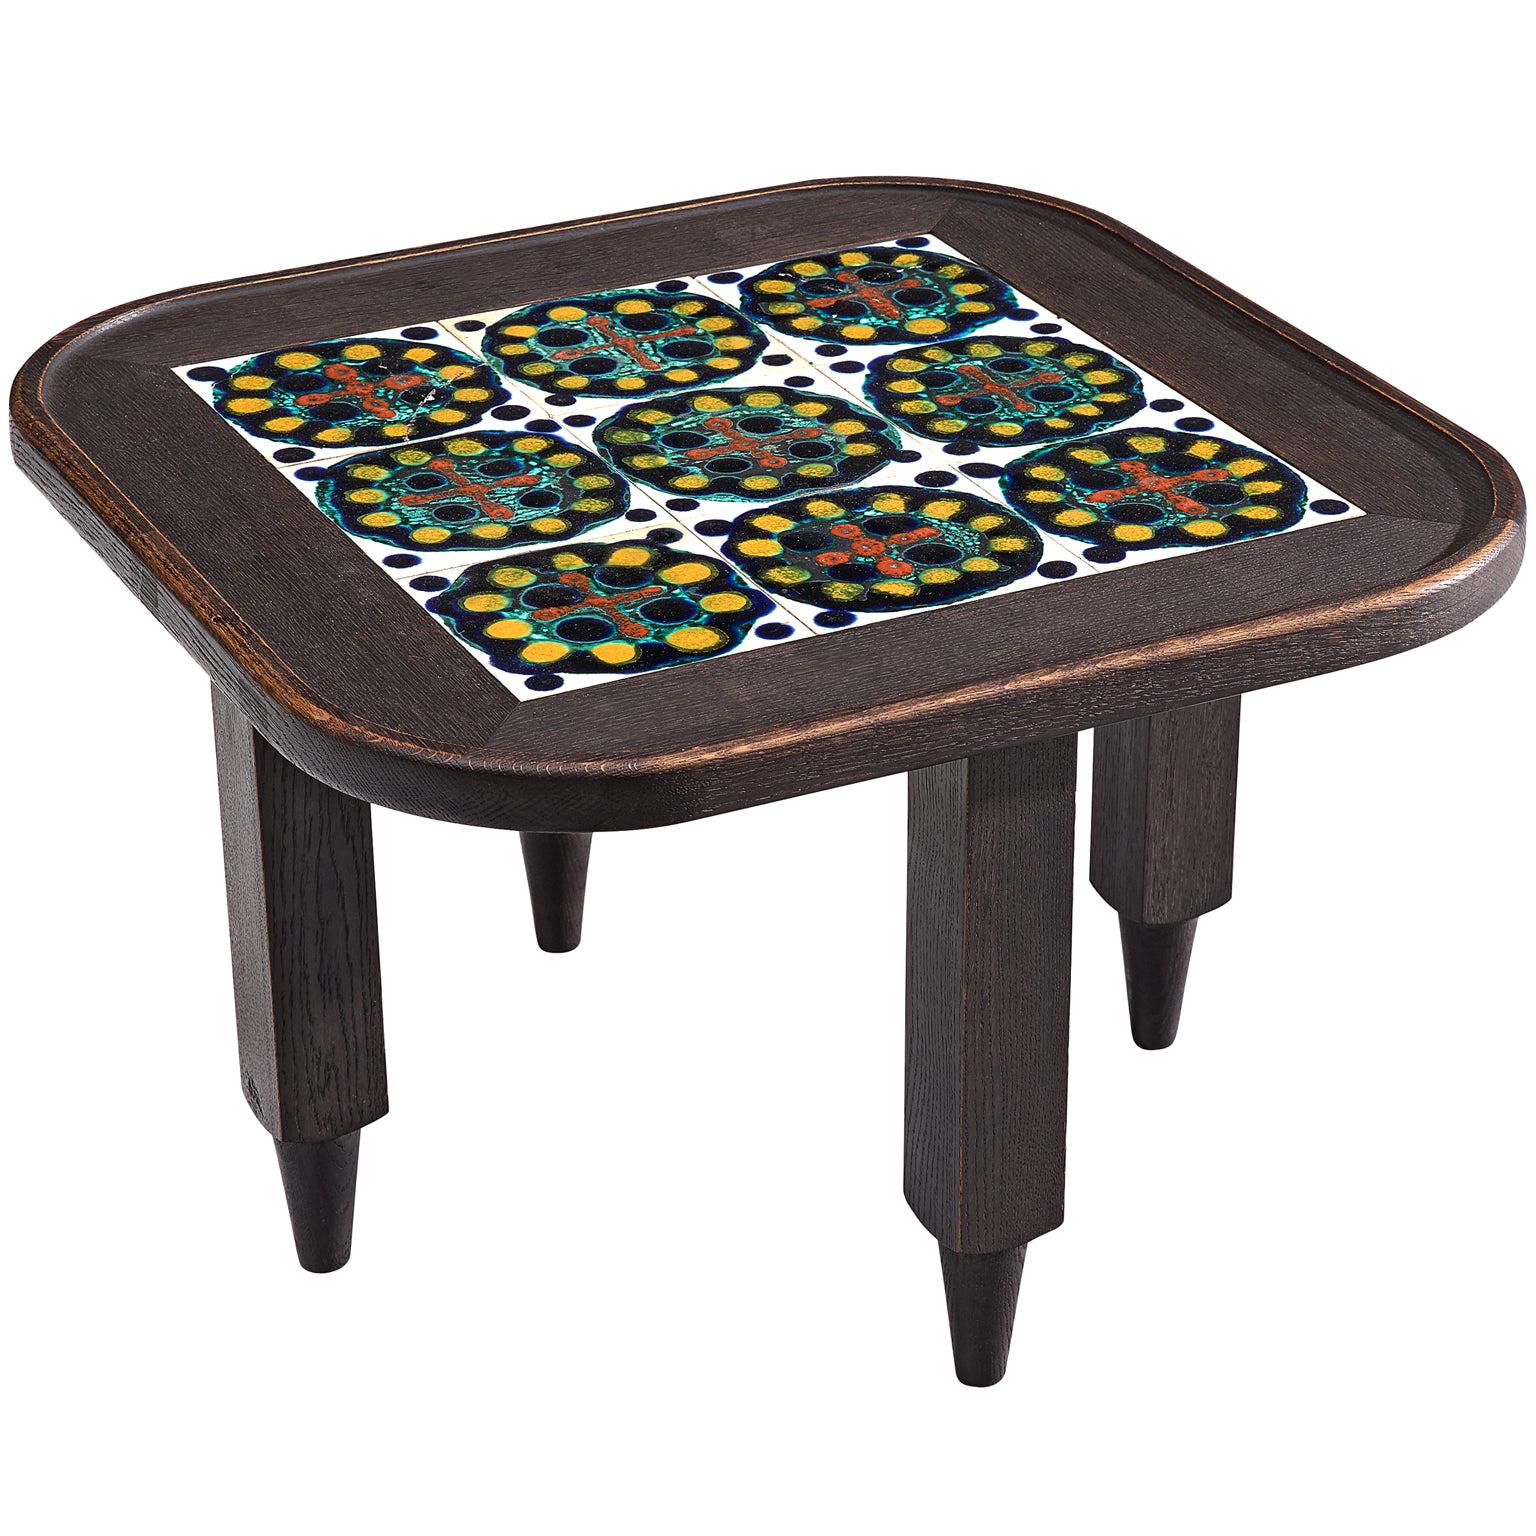 Guillerme et Chambron Square Coffee Table with Ceramics